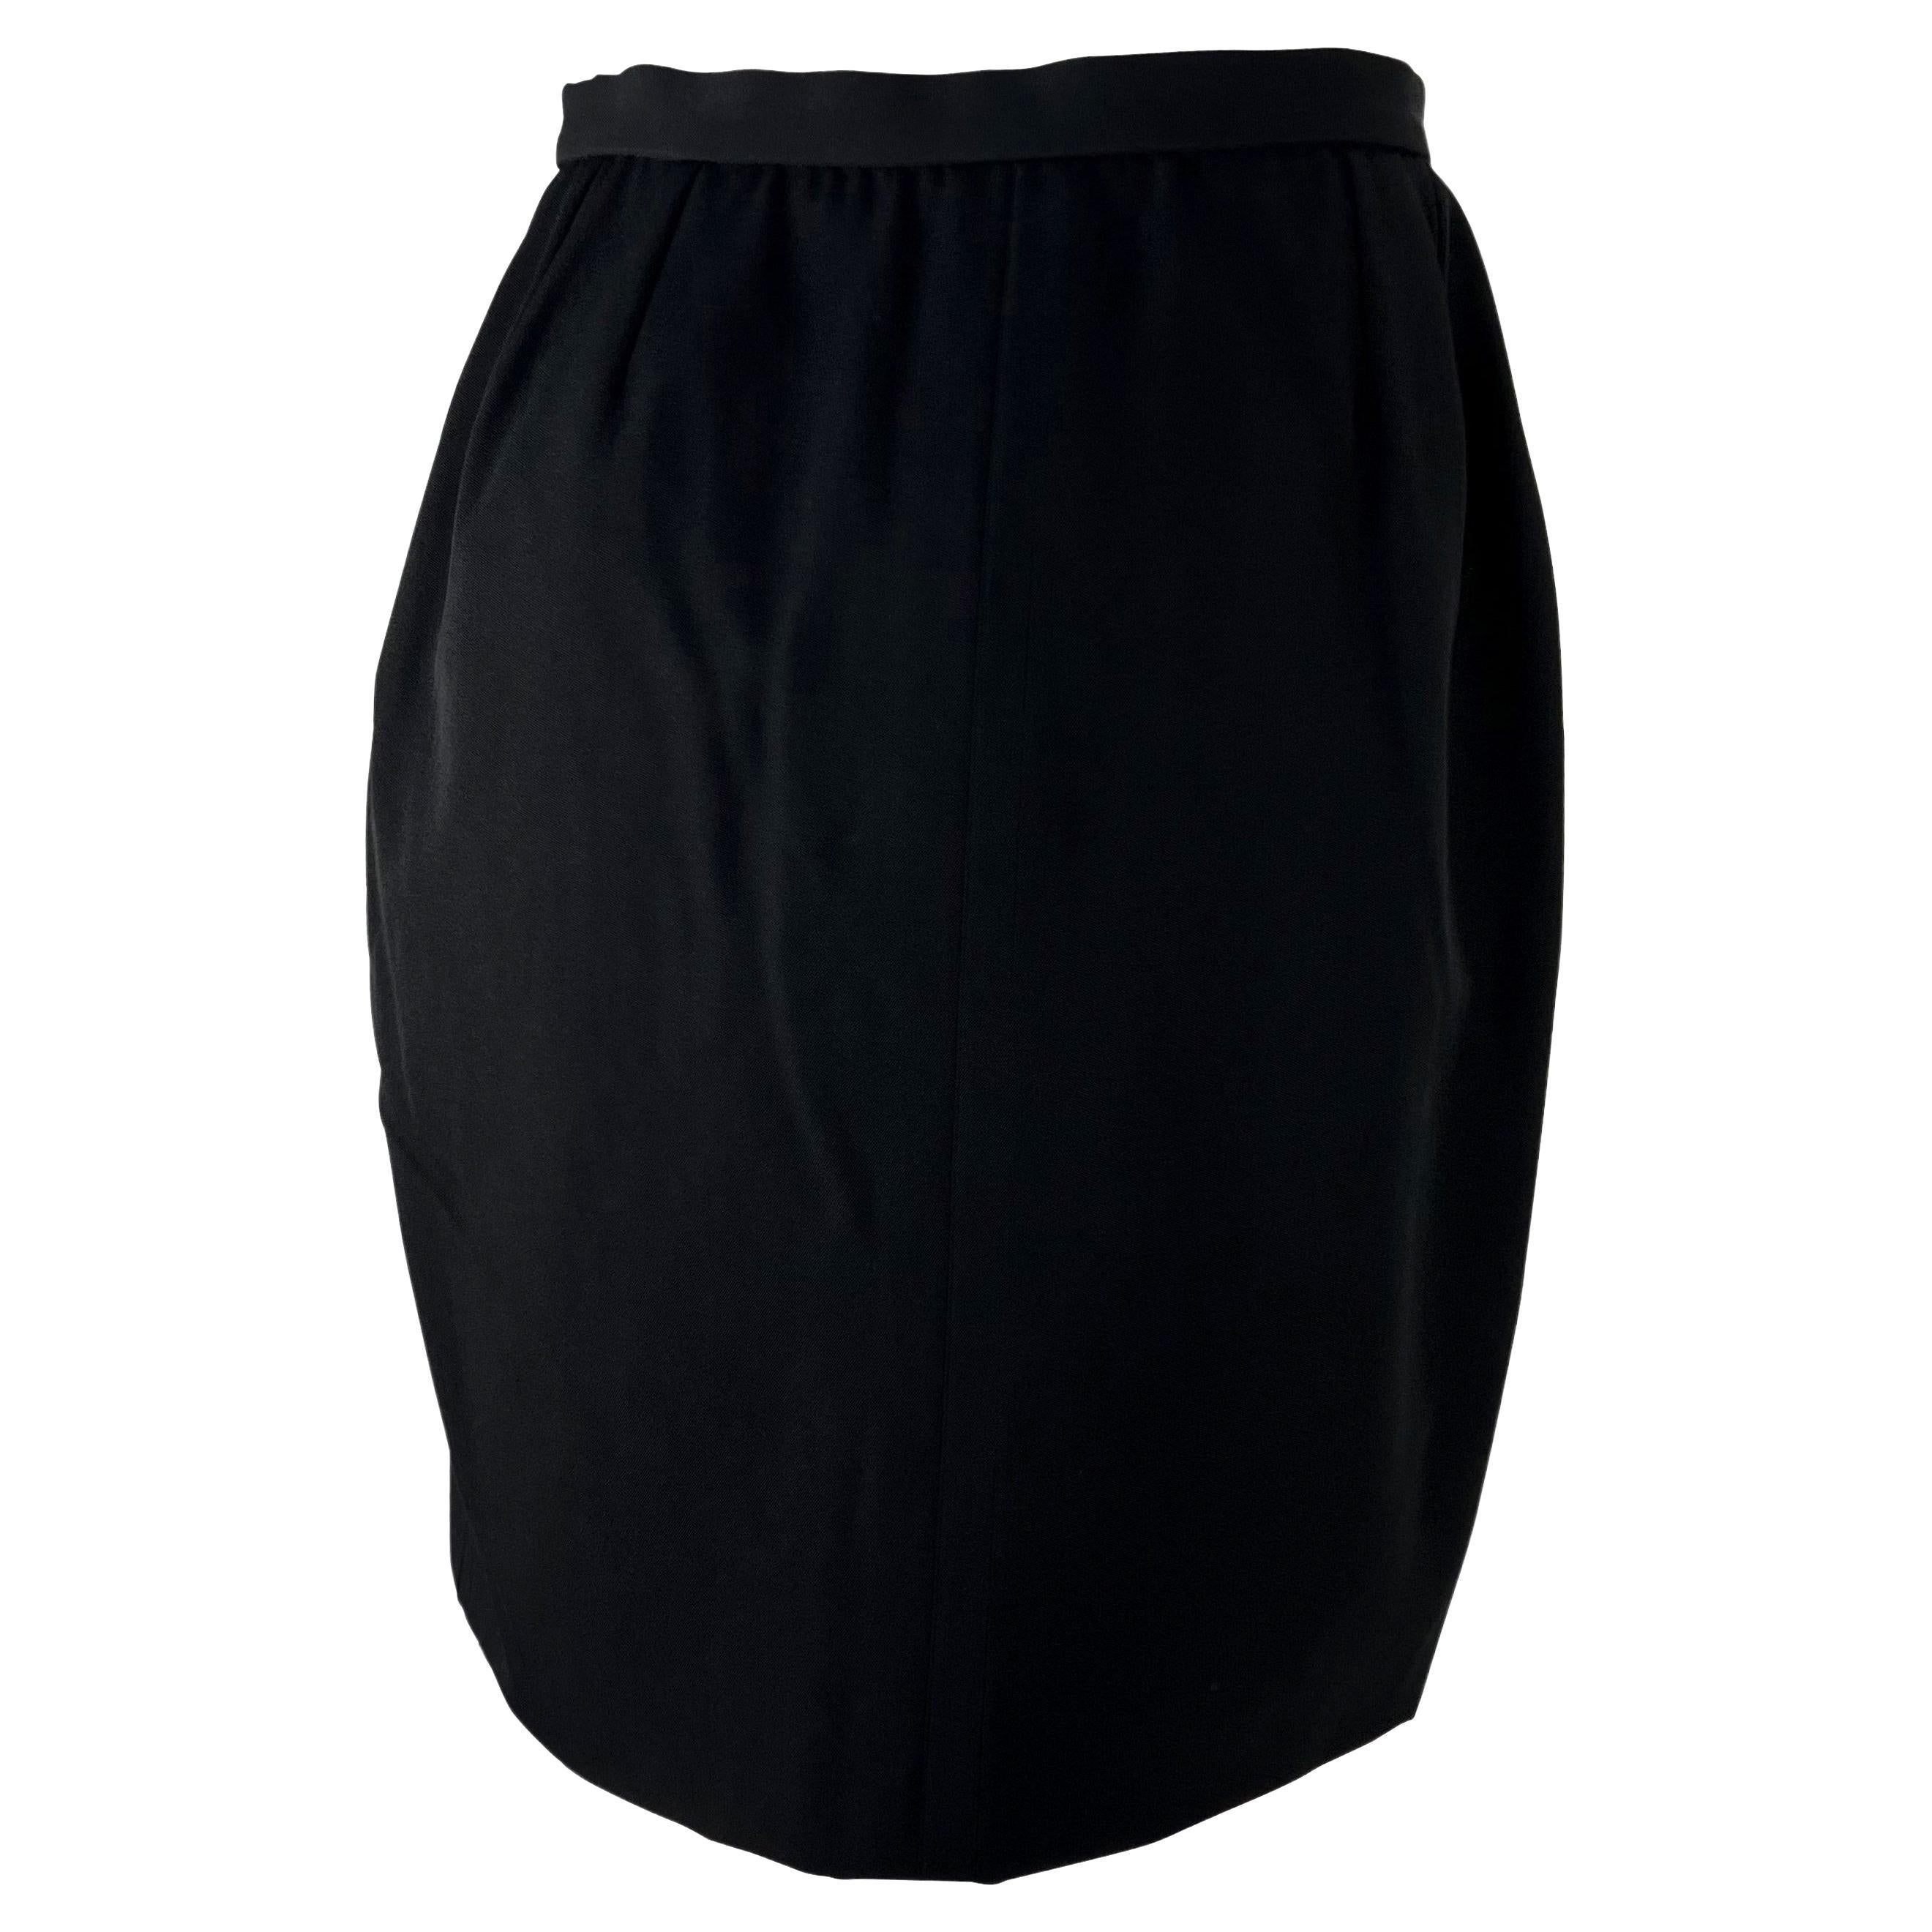 S/S 1989 Yves Saint Laurent Rive Gauche Black Wool Wrap Button Skirt In Excellent Condition For Sale In West Hollywood, CA